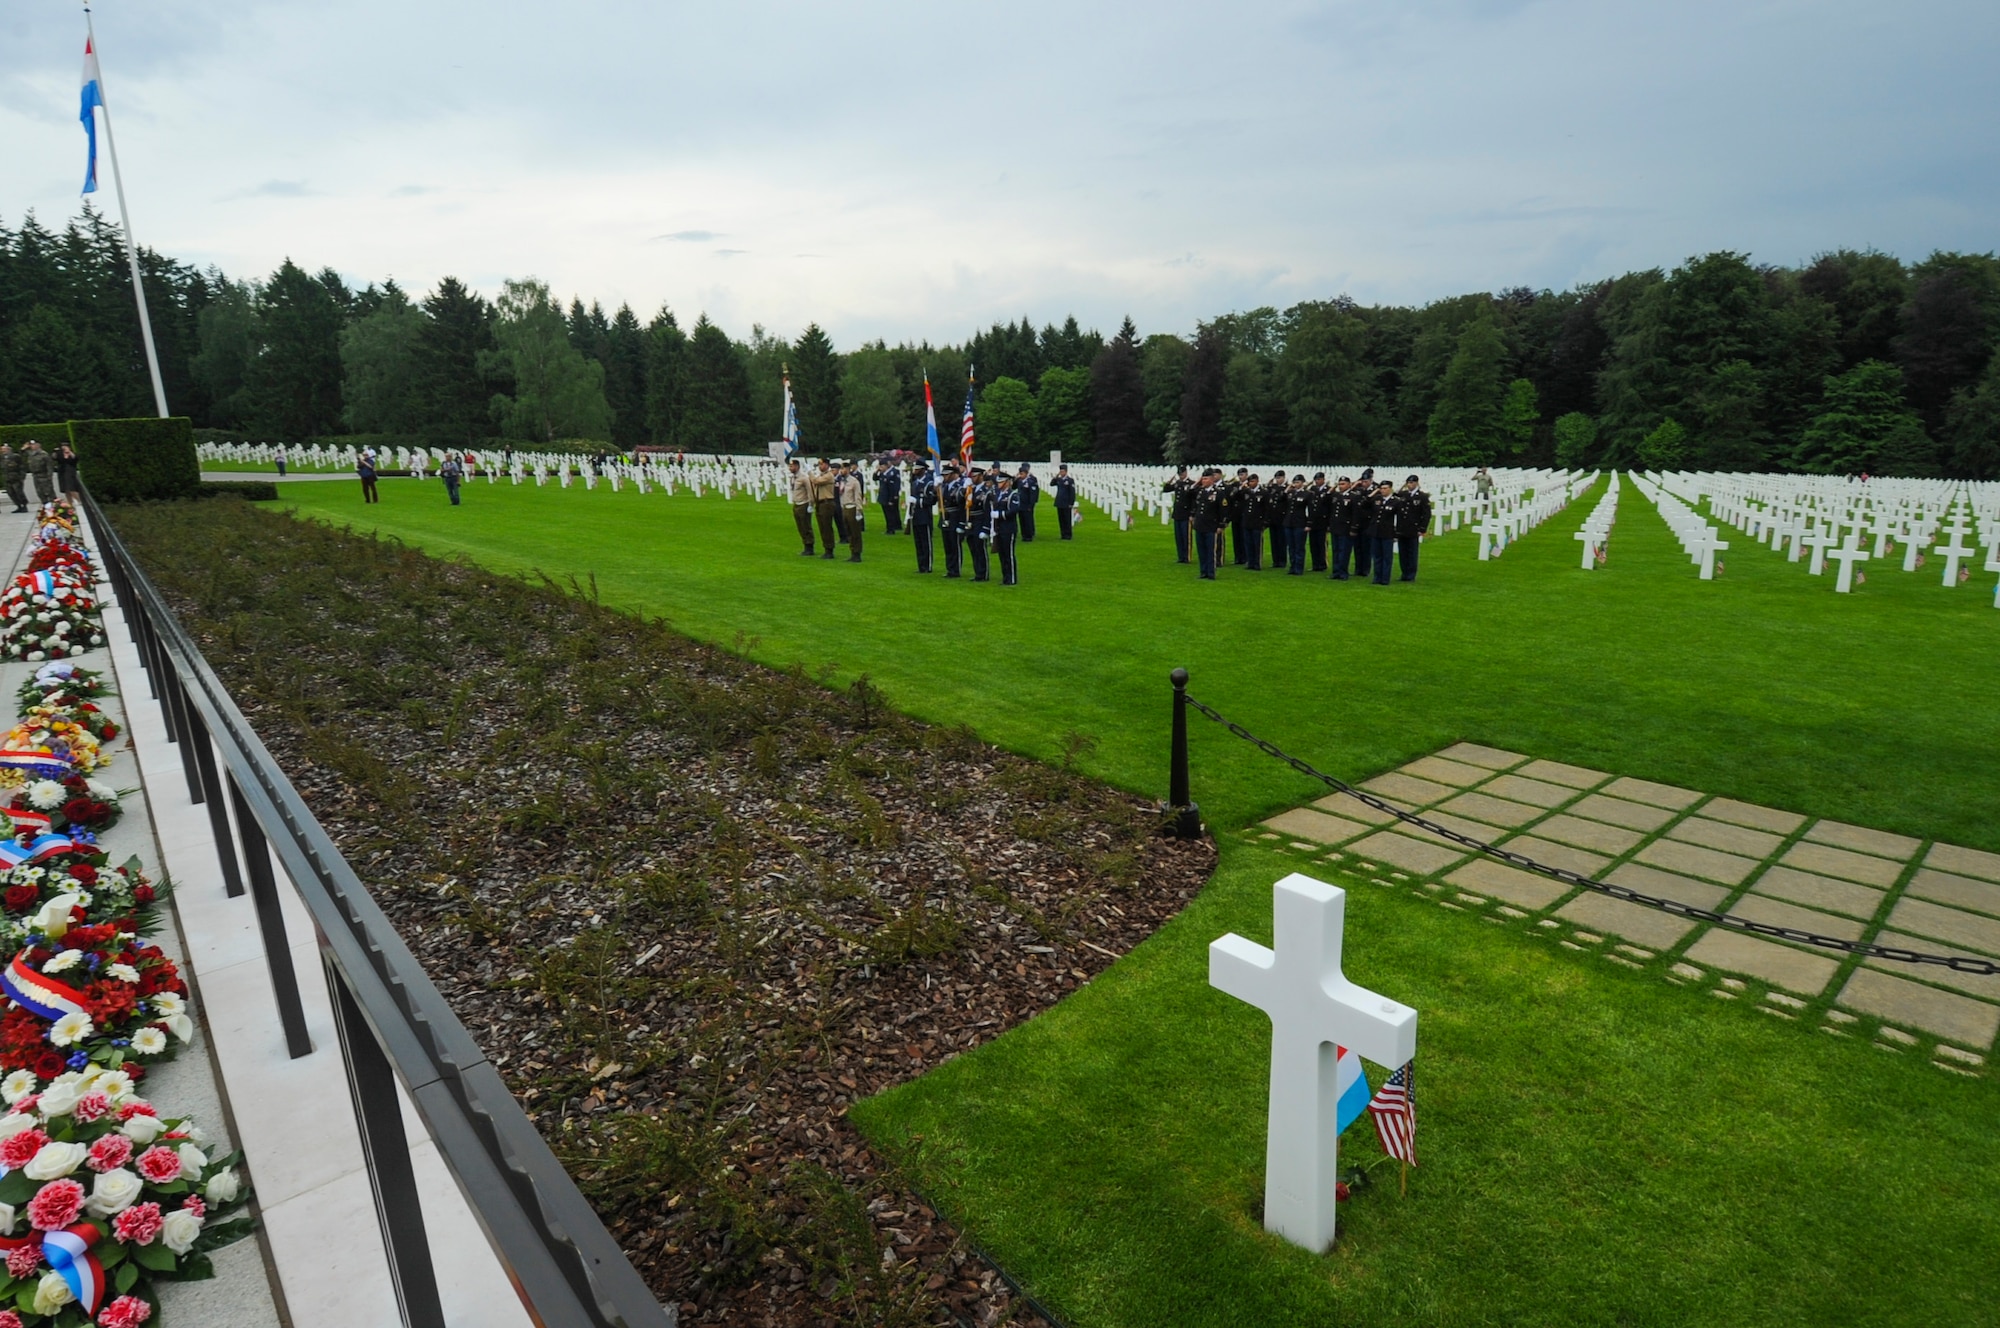 Luxembourg Army Color Guard, U.S. Air Force Airmen assigned to the 52nd Fighter Wing, Spangdahlem Air Base, Germany, and U.S. Army Soldiers assigned to 18th Military Police Brigade, Grafenwoehr, Germany, salute during a Memorial Day ceremony at the Luxembourg American Cemetery and Memorial in Luxembourg, May 28, 2016. The holiday serves as an opportunity to pause and remember the sacrifices of more than one million Soldiers, Sailors, Airmen, Marines and Coast Guardsmen who gave their lives in defense of freedom.   (U.S. Air Force photo by Staff Sgt. Joe W. McFadden/Released)  